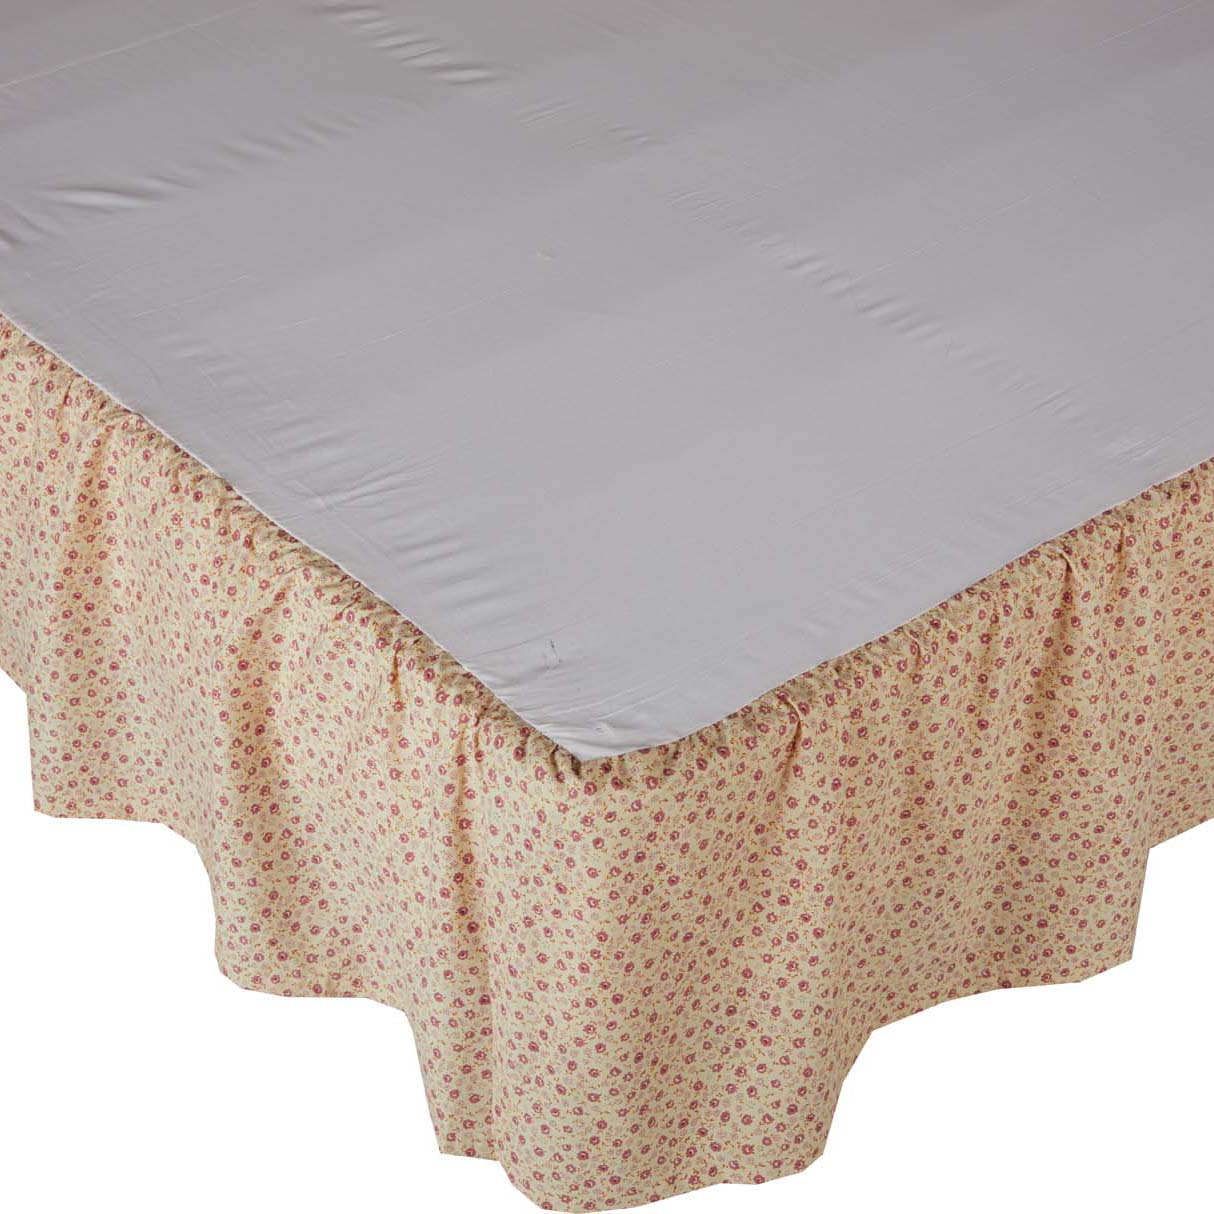 70077-Camilia-Queen-Bed-Skirt-60x80x16-image-5